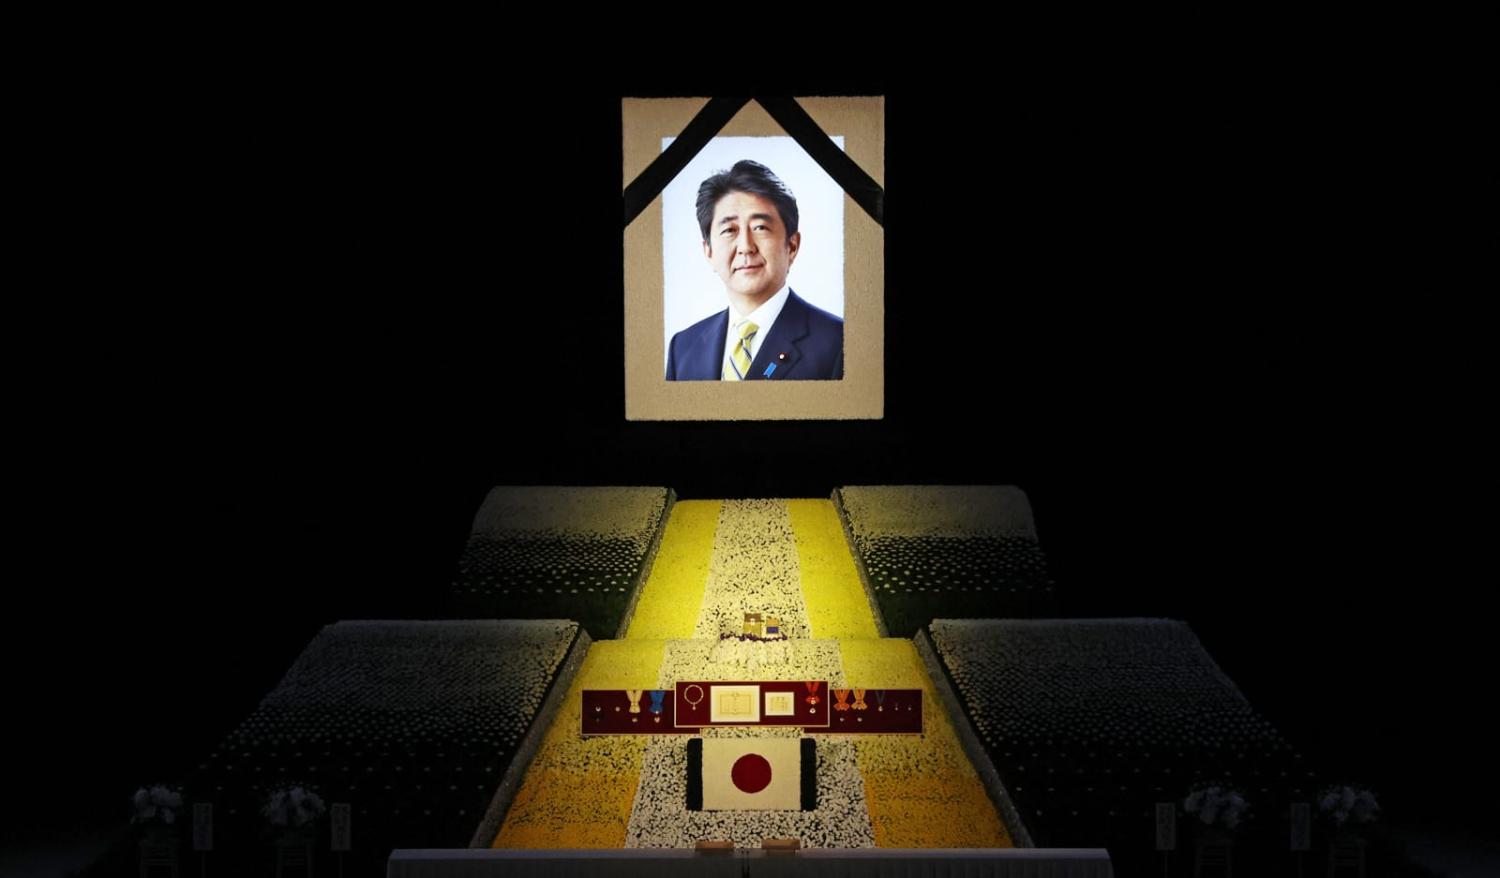 Abe’s assassin professed no issue with either the former prime minister’s politics or international engagement, but claimed to be motivated by Abe’s association with religious movement the Unification Church (Takashi Aoyama/AFP via Getty Images)